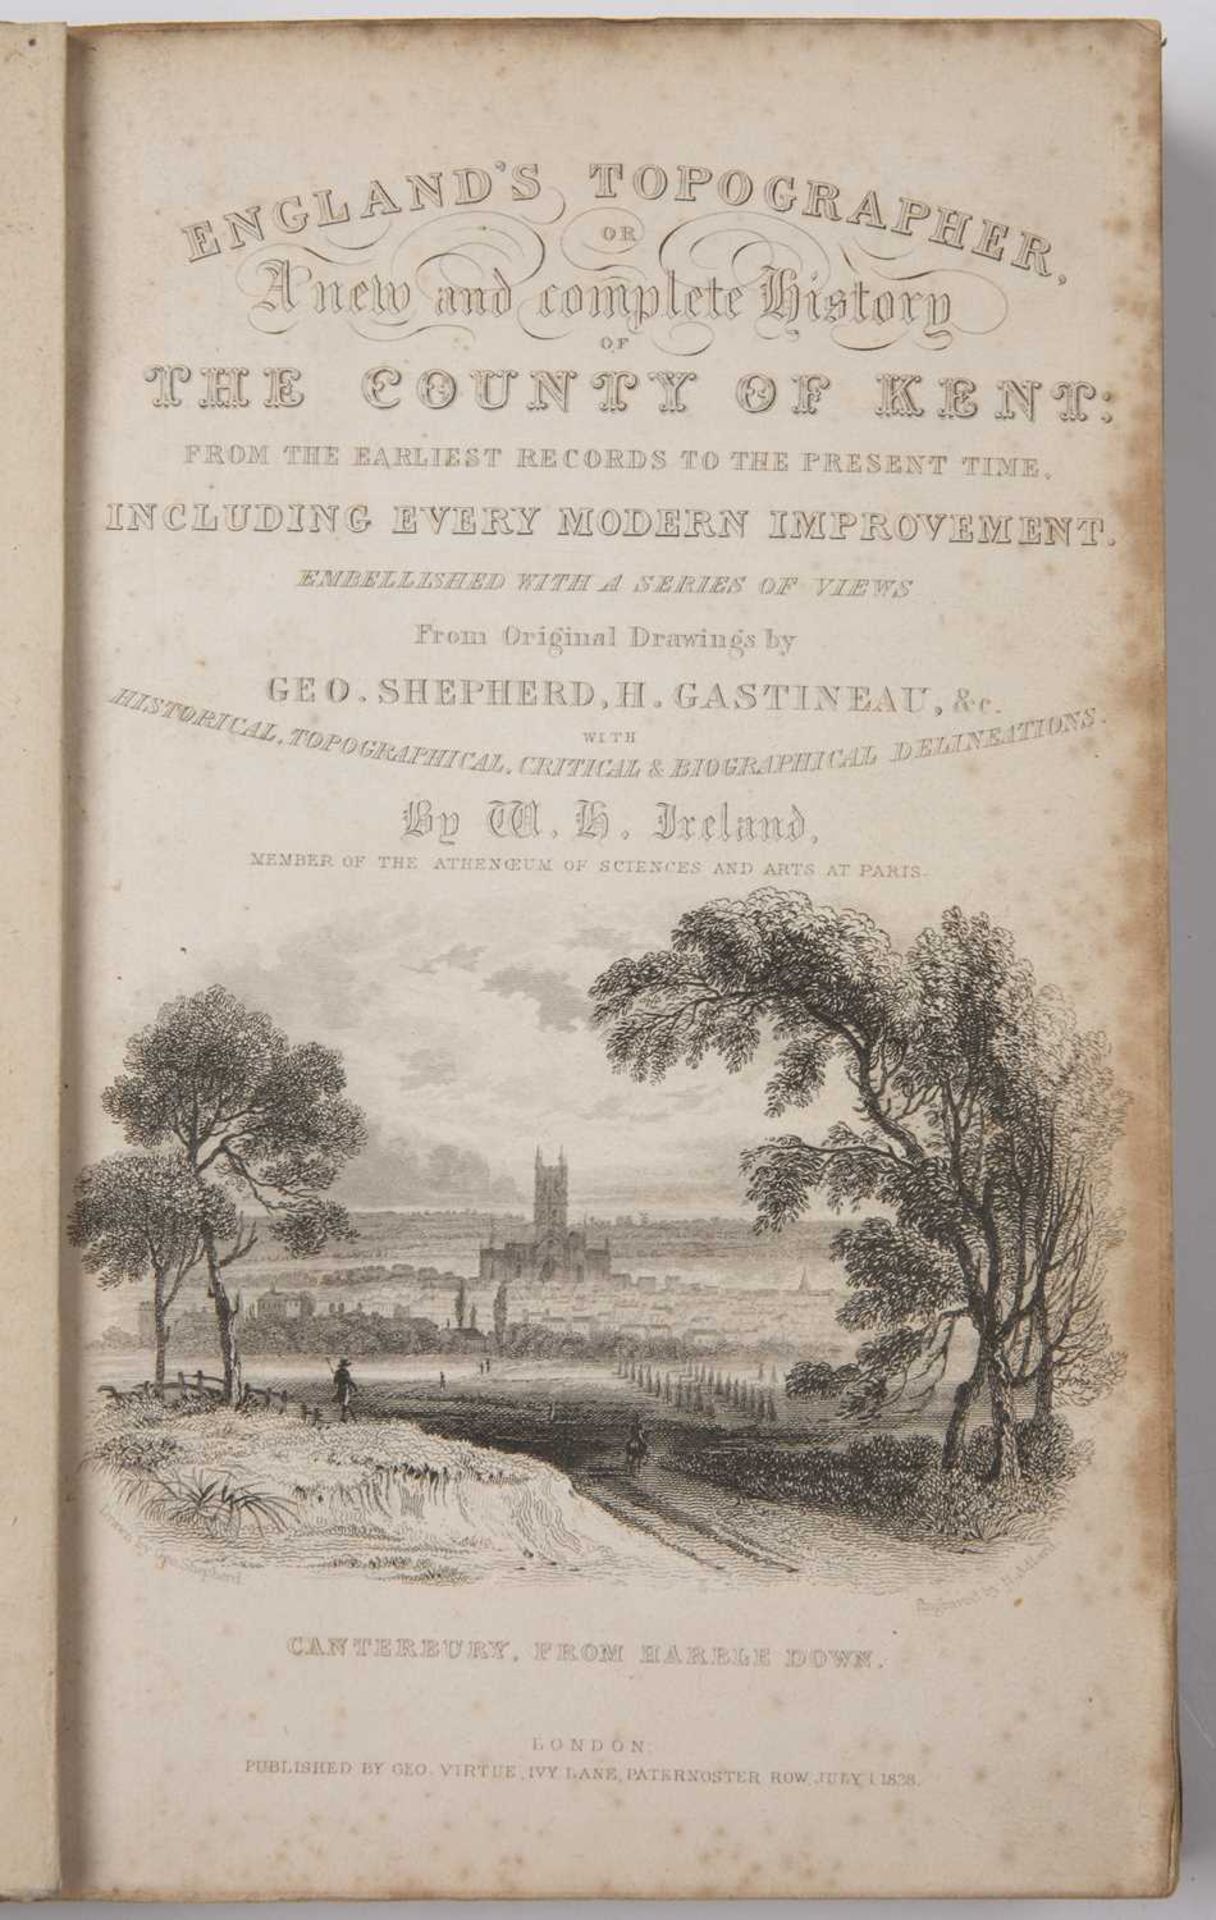 Ireland W.H. Gastineau (G.S.H.) Illus. England's Topographer, or New and Complete History of Kent. - Image 2 of 4